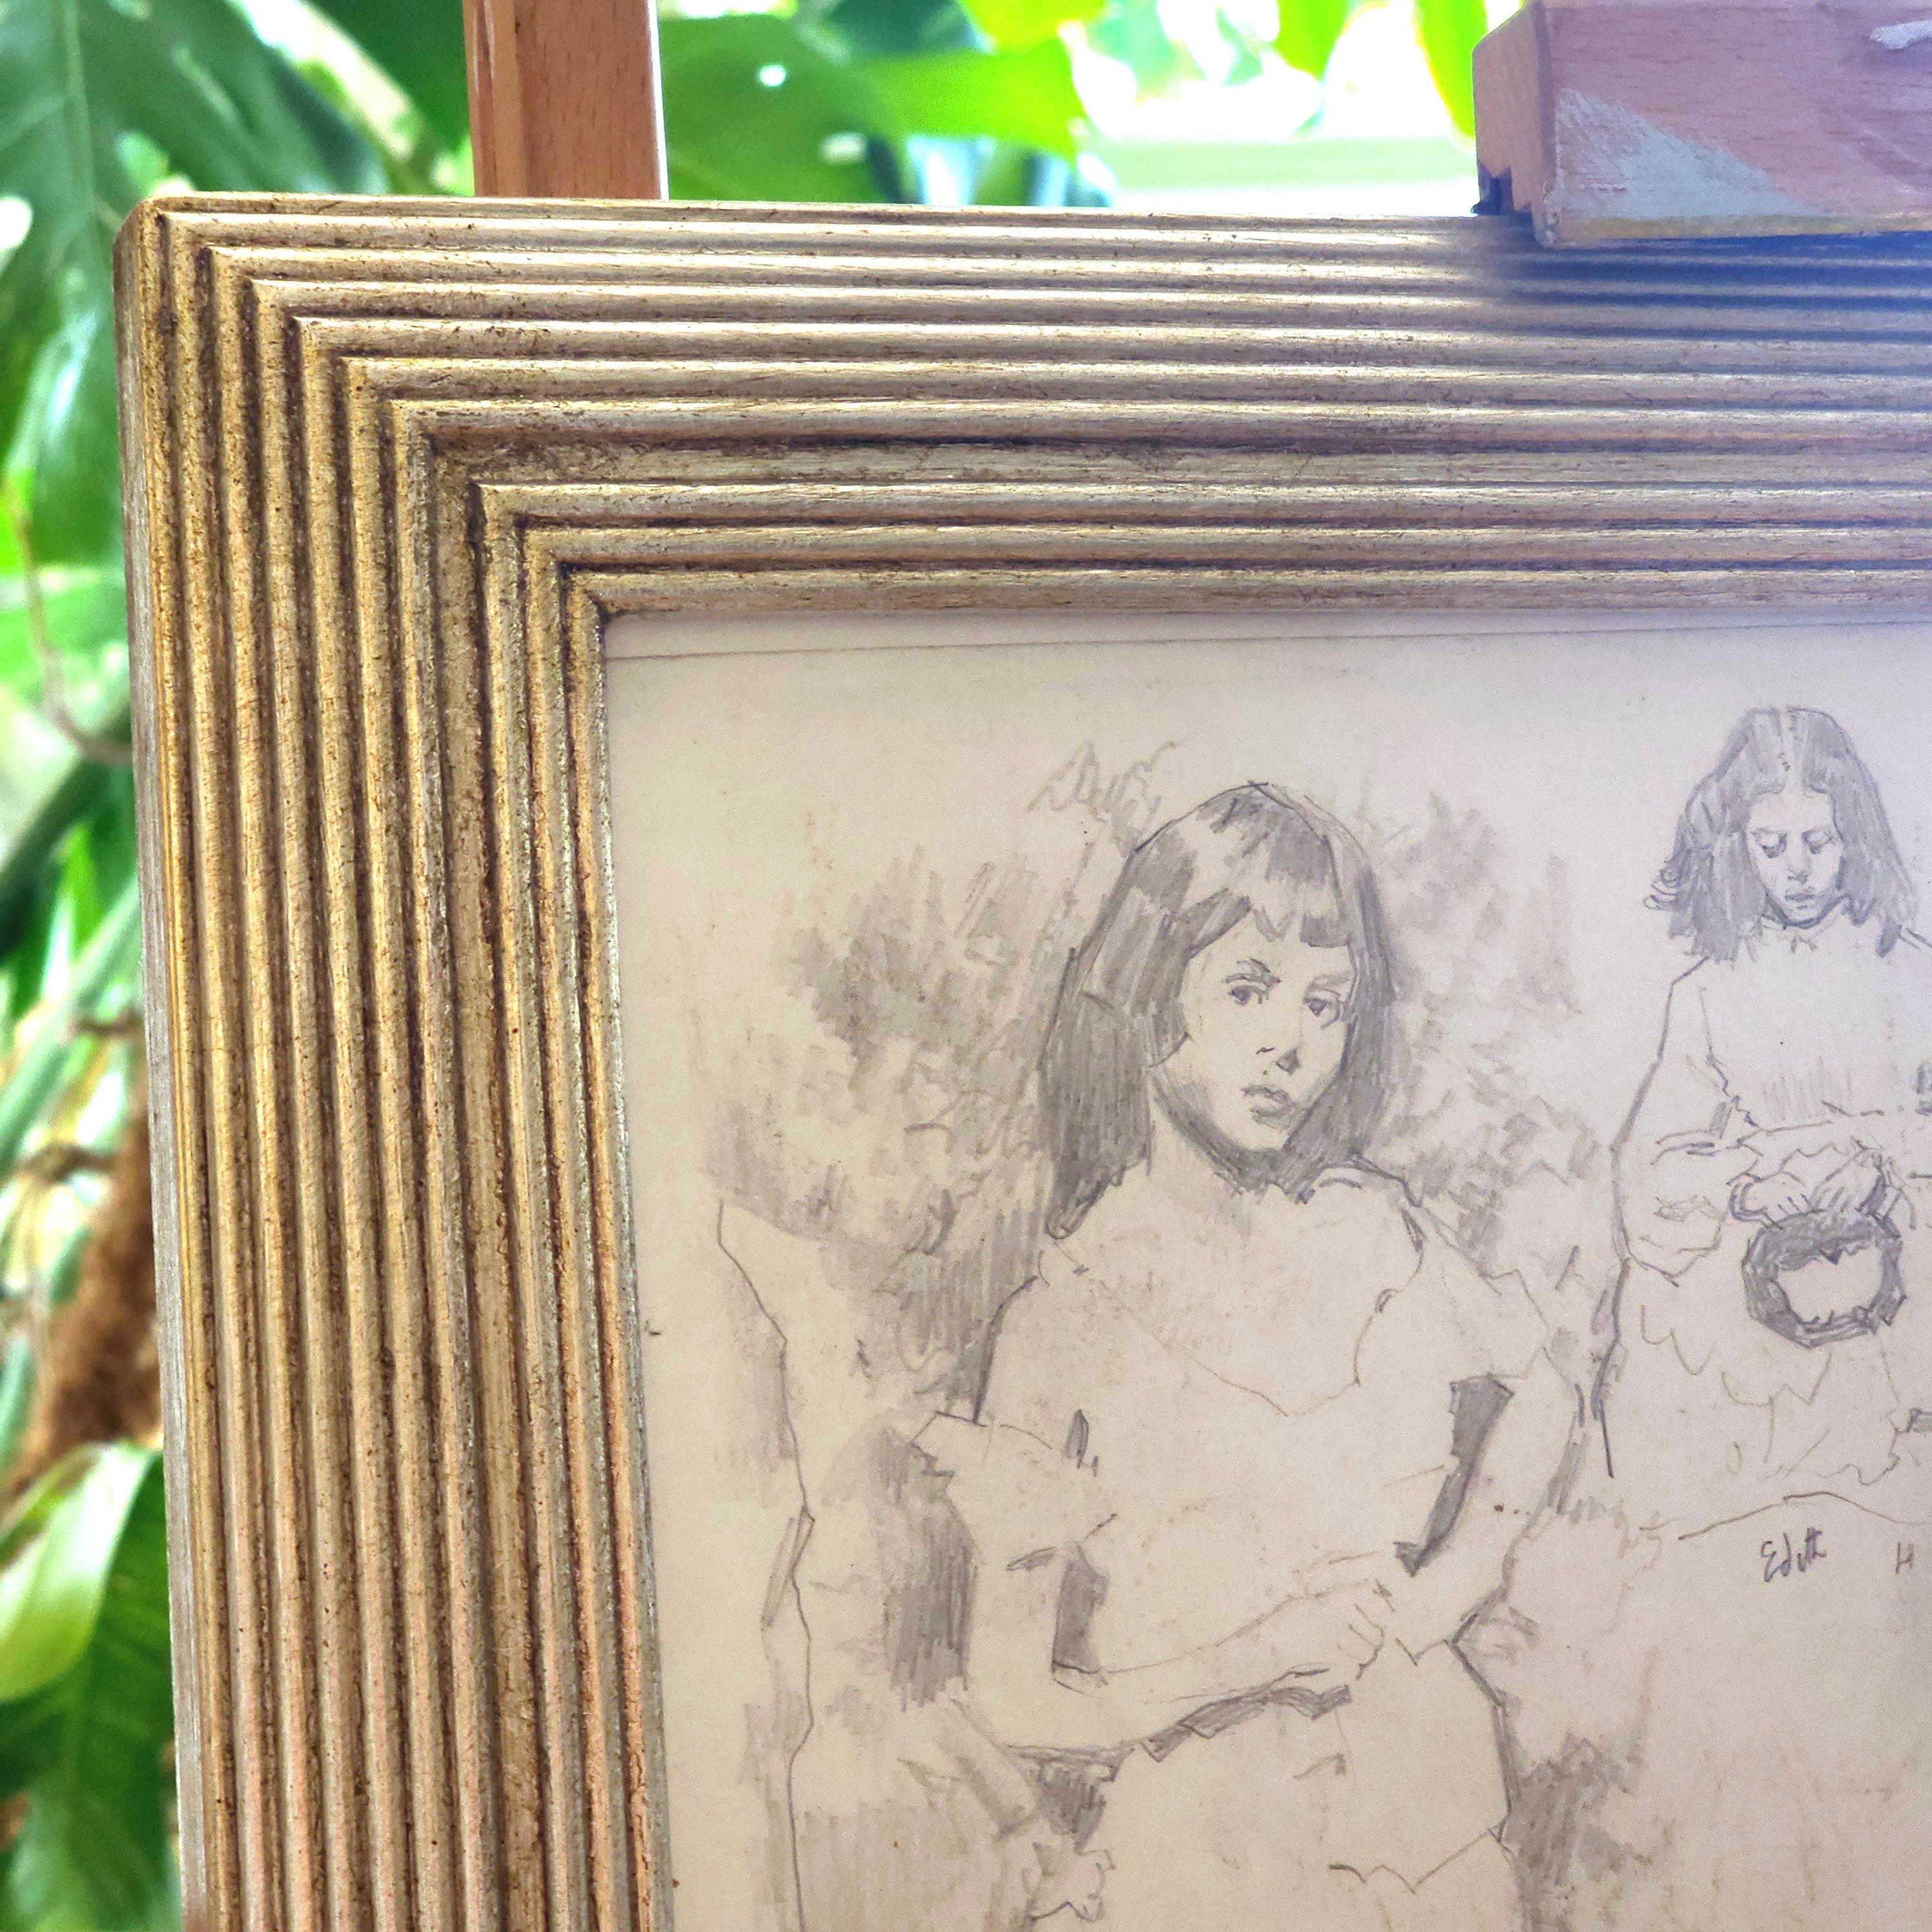 This is a beautiful drawing, brimming with the unique personalities of Alice Liddell and her beloved sisters, Lorina and Edith.  Dating back to the late 19th Century, this captivating study captures the essence of the innocence of Youth.

While the